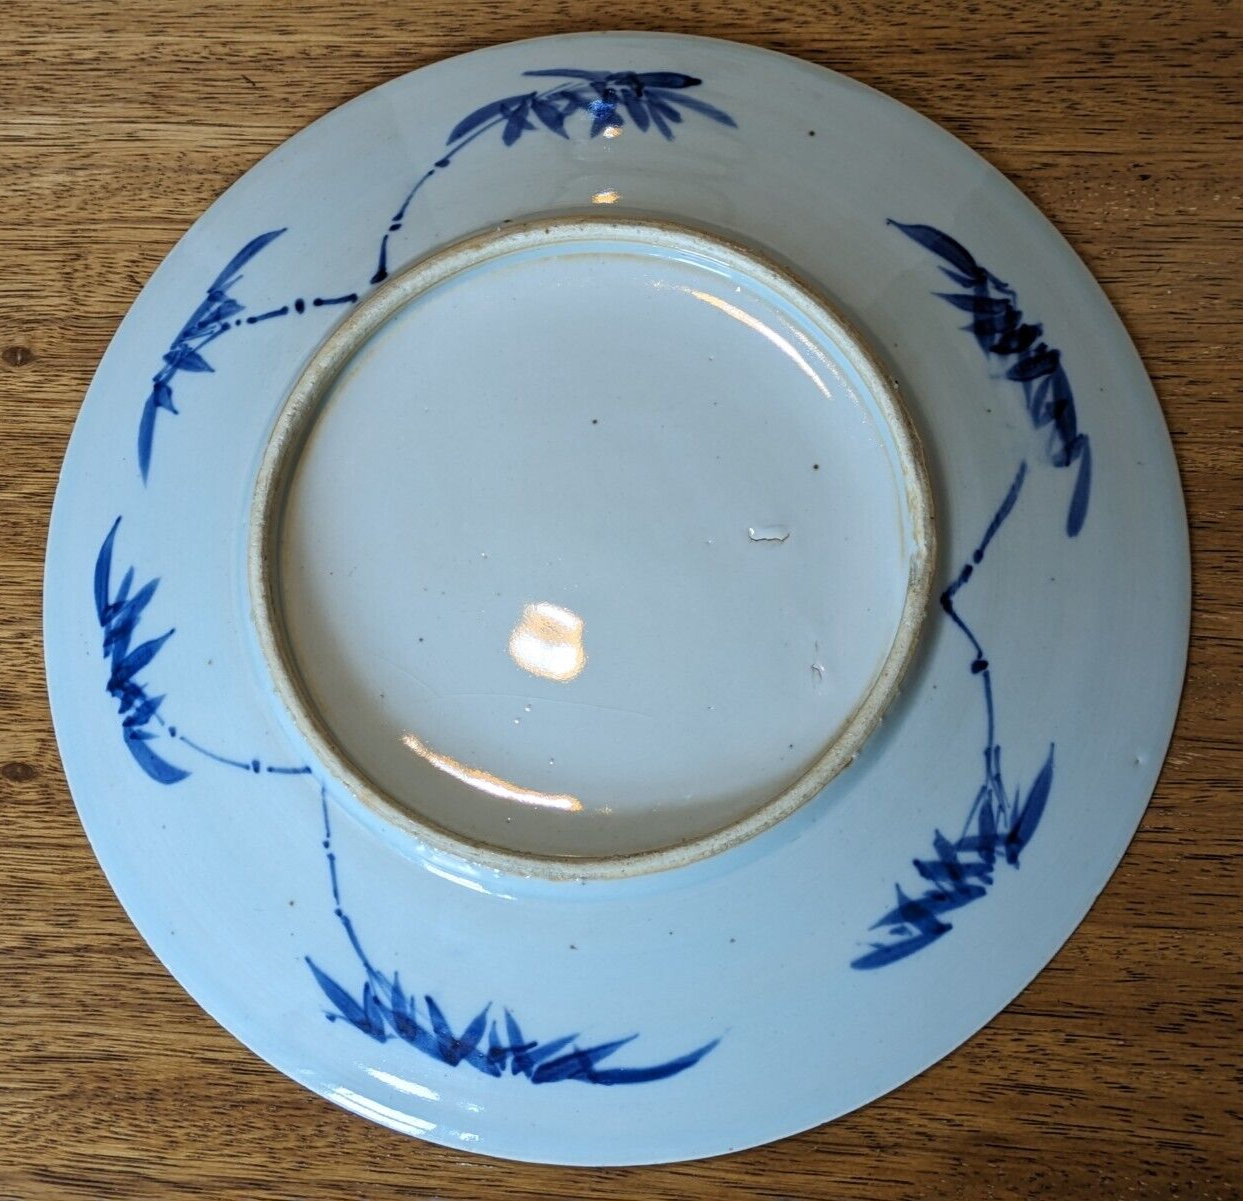 18th Century Chinese Blue & White Hundred Antiquities Object Porcelain Plate 12"